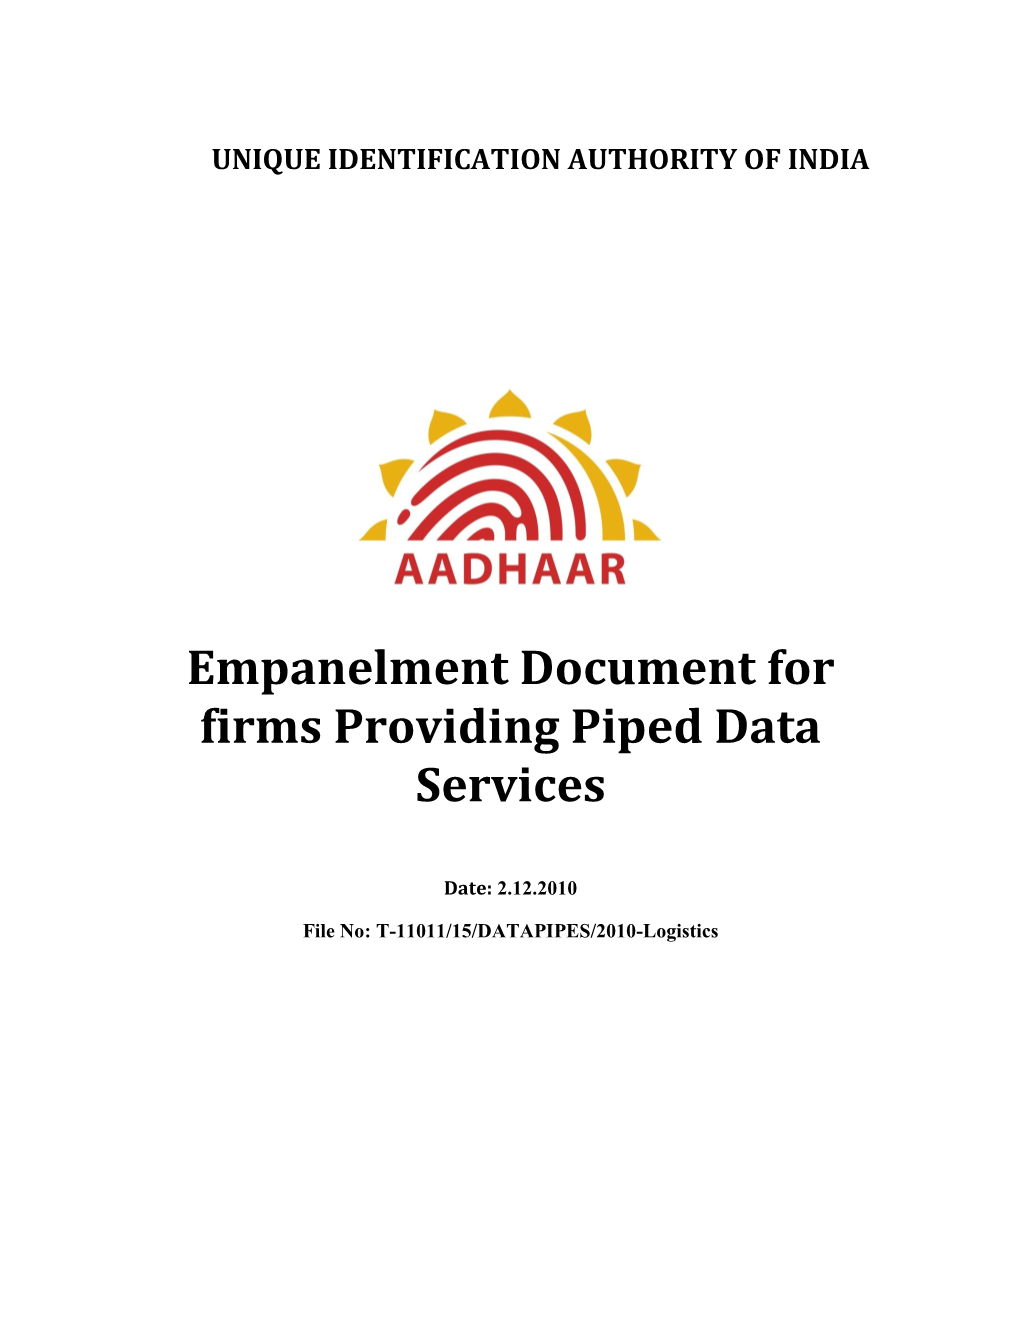 The UIDAI Has Conducted an Empanelment of Piped Data Service